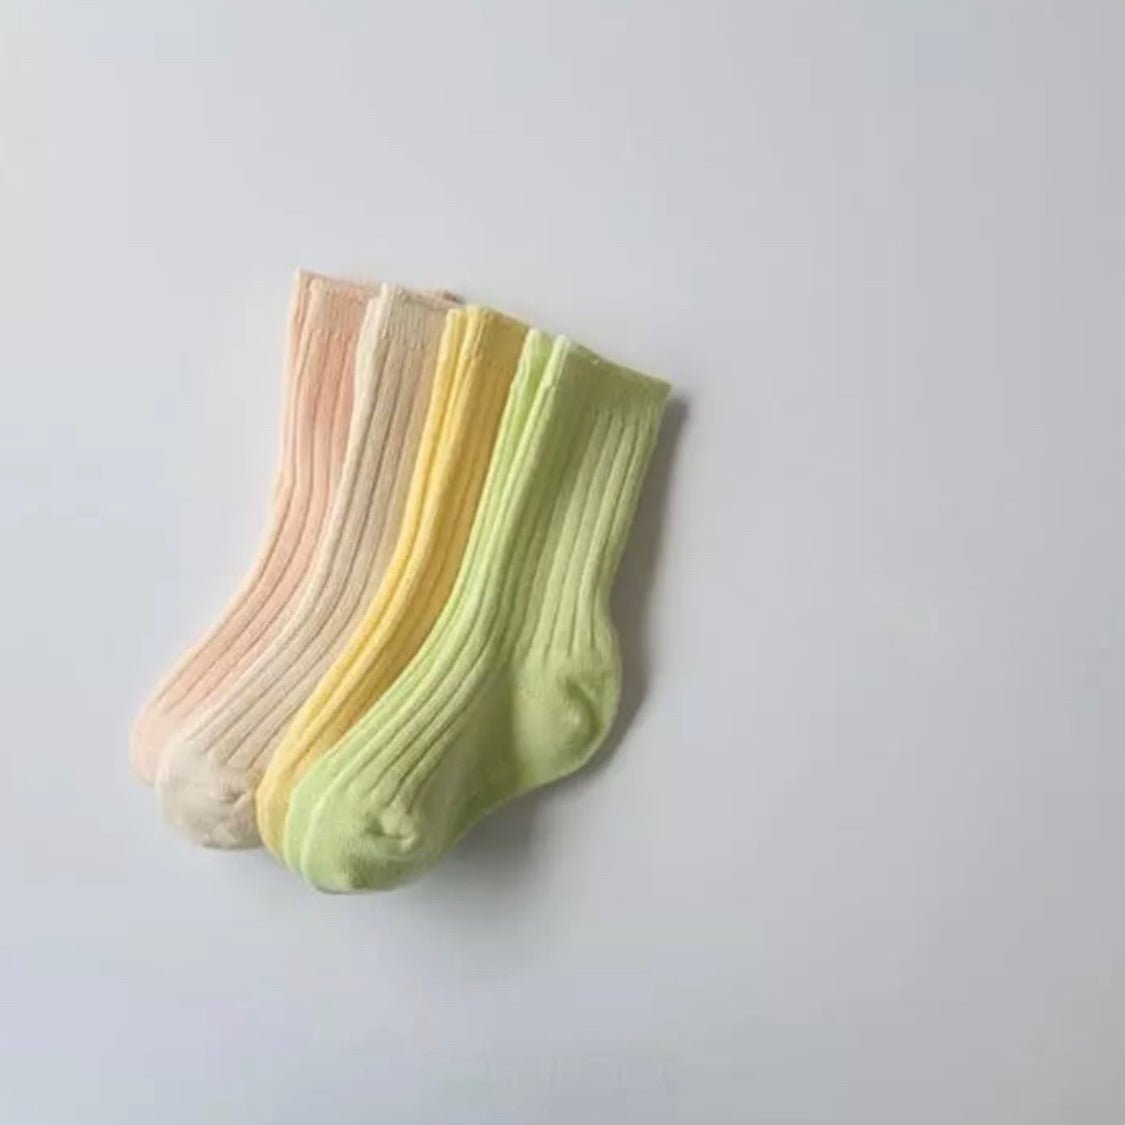 Mojito Socken (4er Set) find Stylish Fashion for Little People- at Little Foxx Concept Store